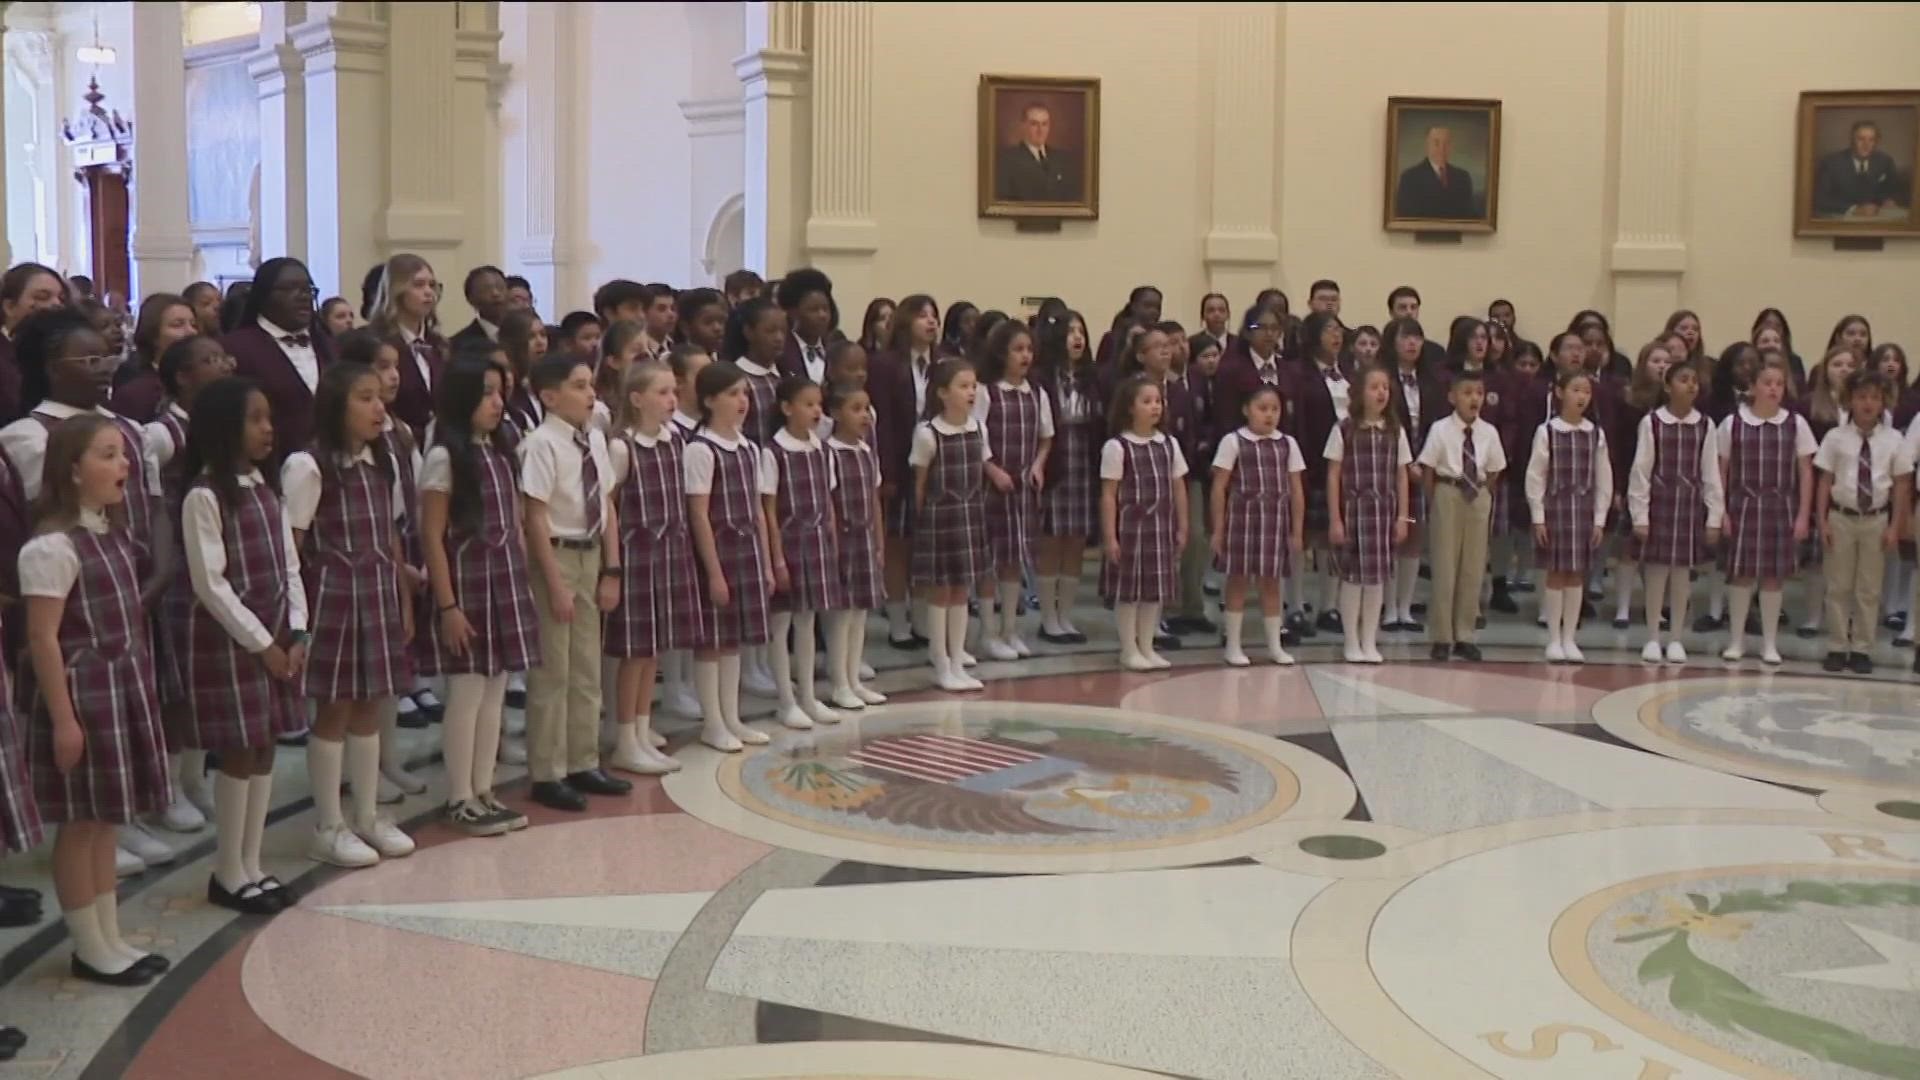 At the State Capitol on Monday, charter school students serenated lawmakers.